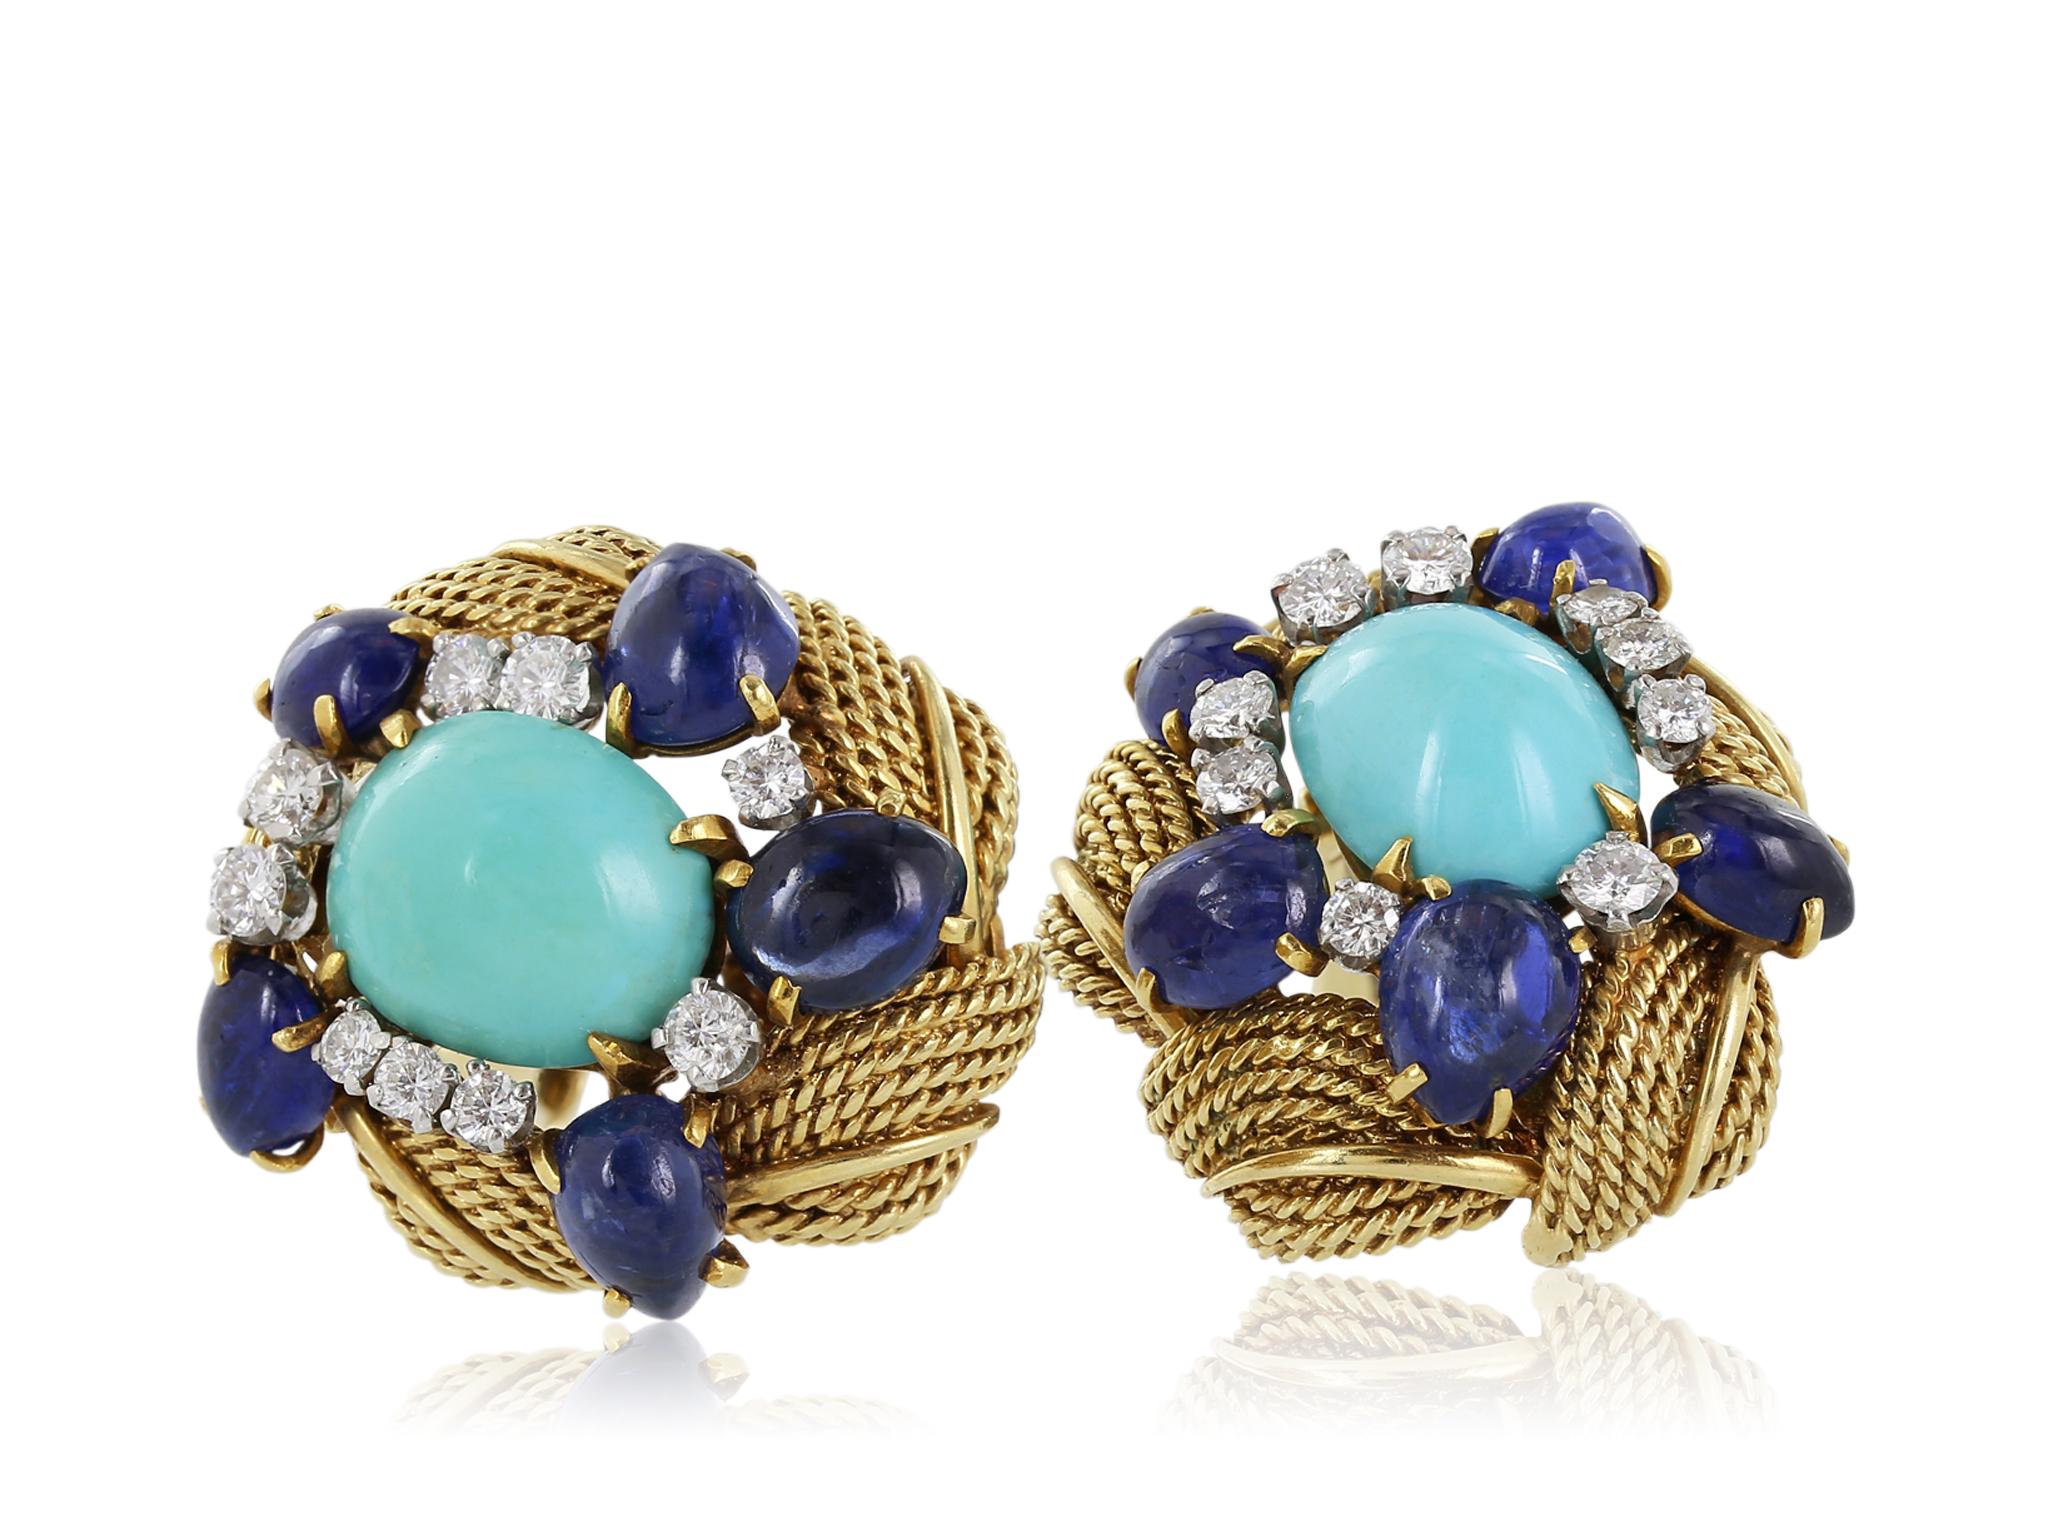 18 karat yellow gold earrings featuring 2 cabochon turquoise stones with an approximate weight of 8.80 carats surrounded by 18 full cut diamonds with an approximate weight of .90 carats alternating with 10 cabochon sapphires with an approximate